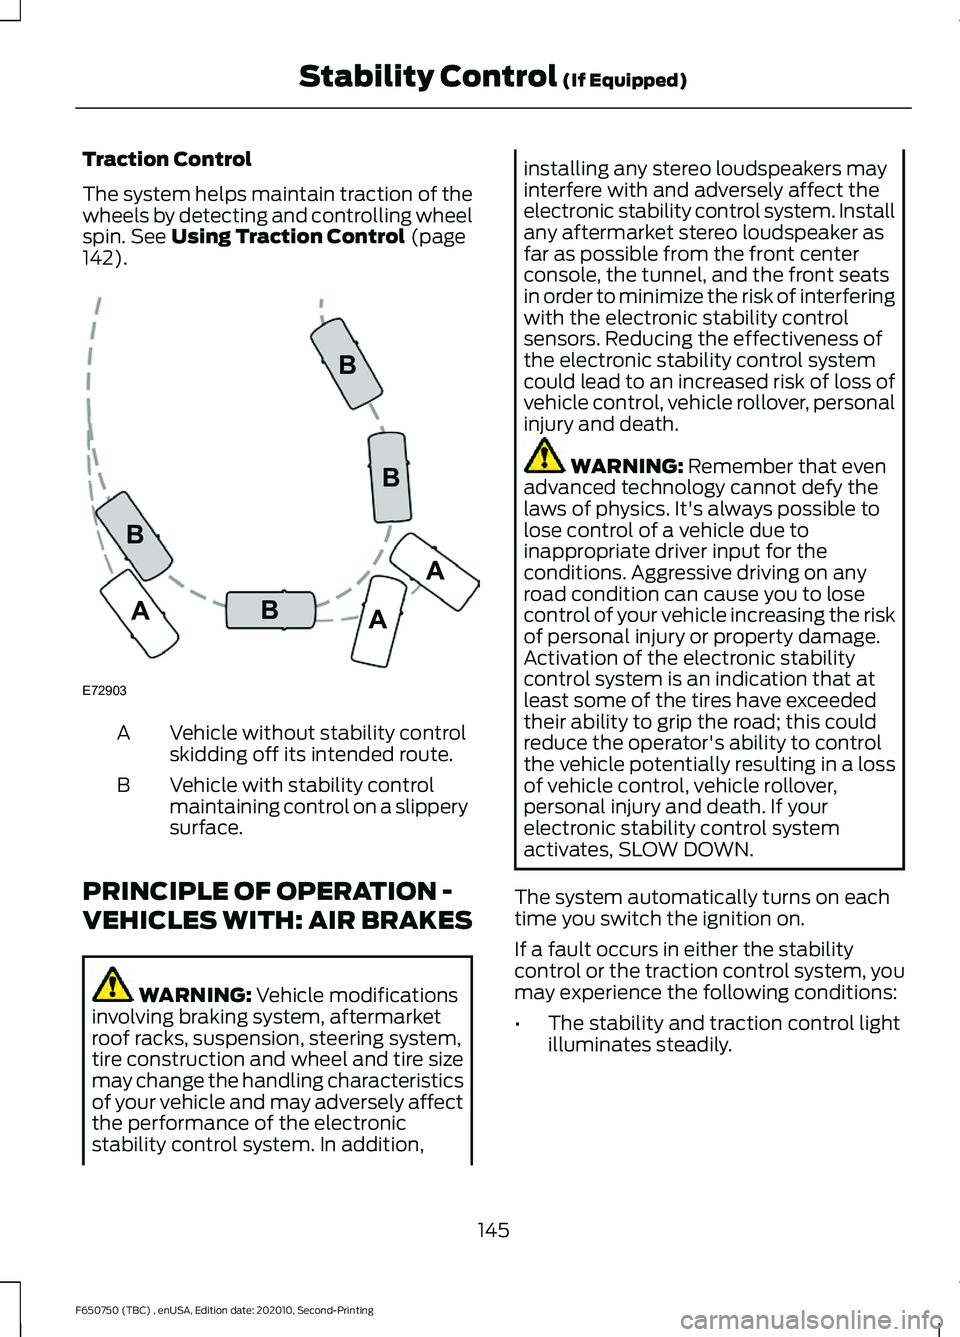 FORD F650/750 2021  Owners Manual Traction Control
The system helps maintain traction of the
wheels by detecting and controlling wheel
spin. See Using Traction Control (page
142). Vehicle without stability control
skidding off its int